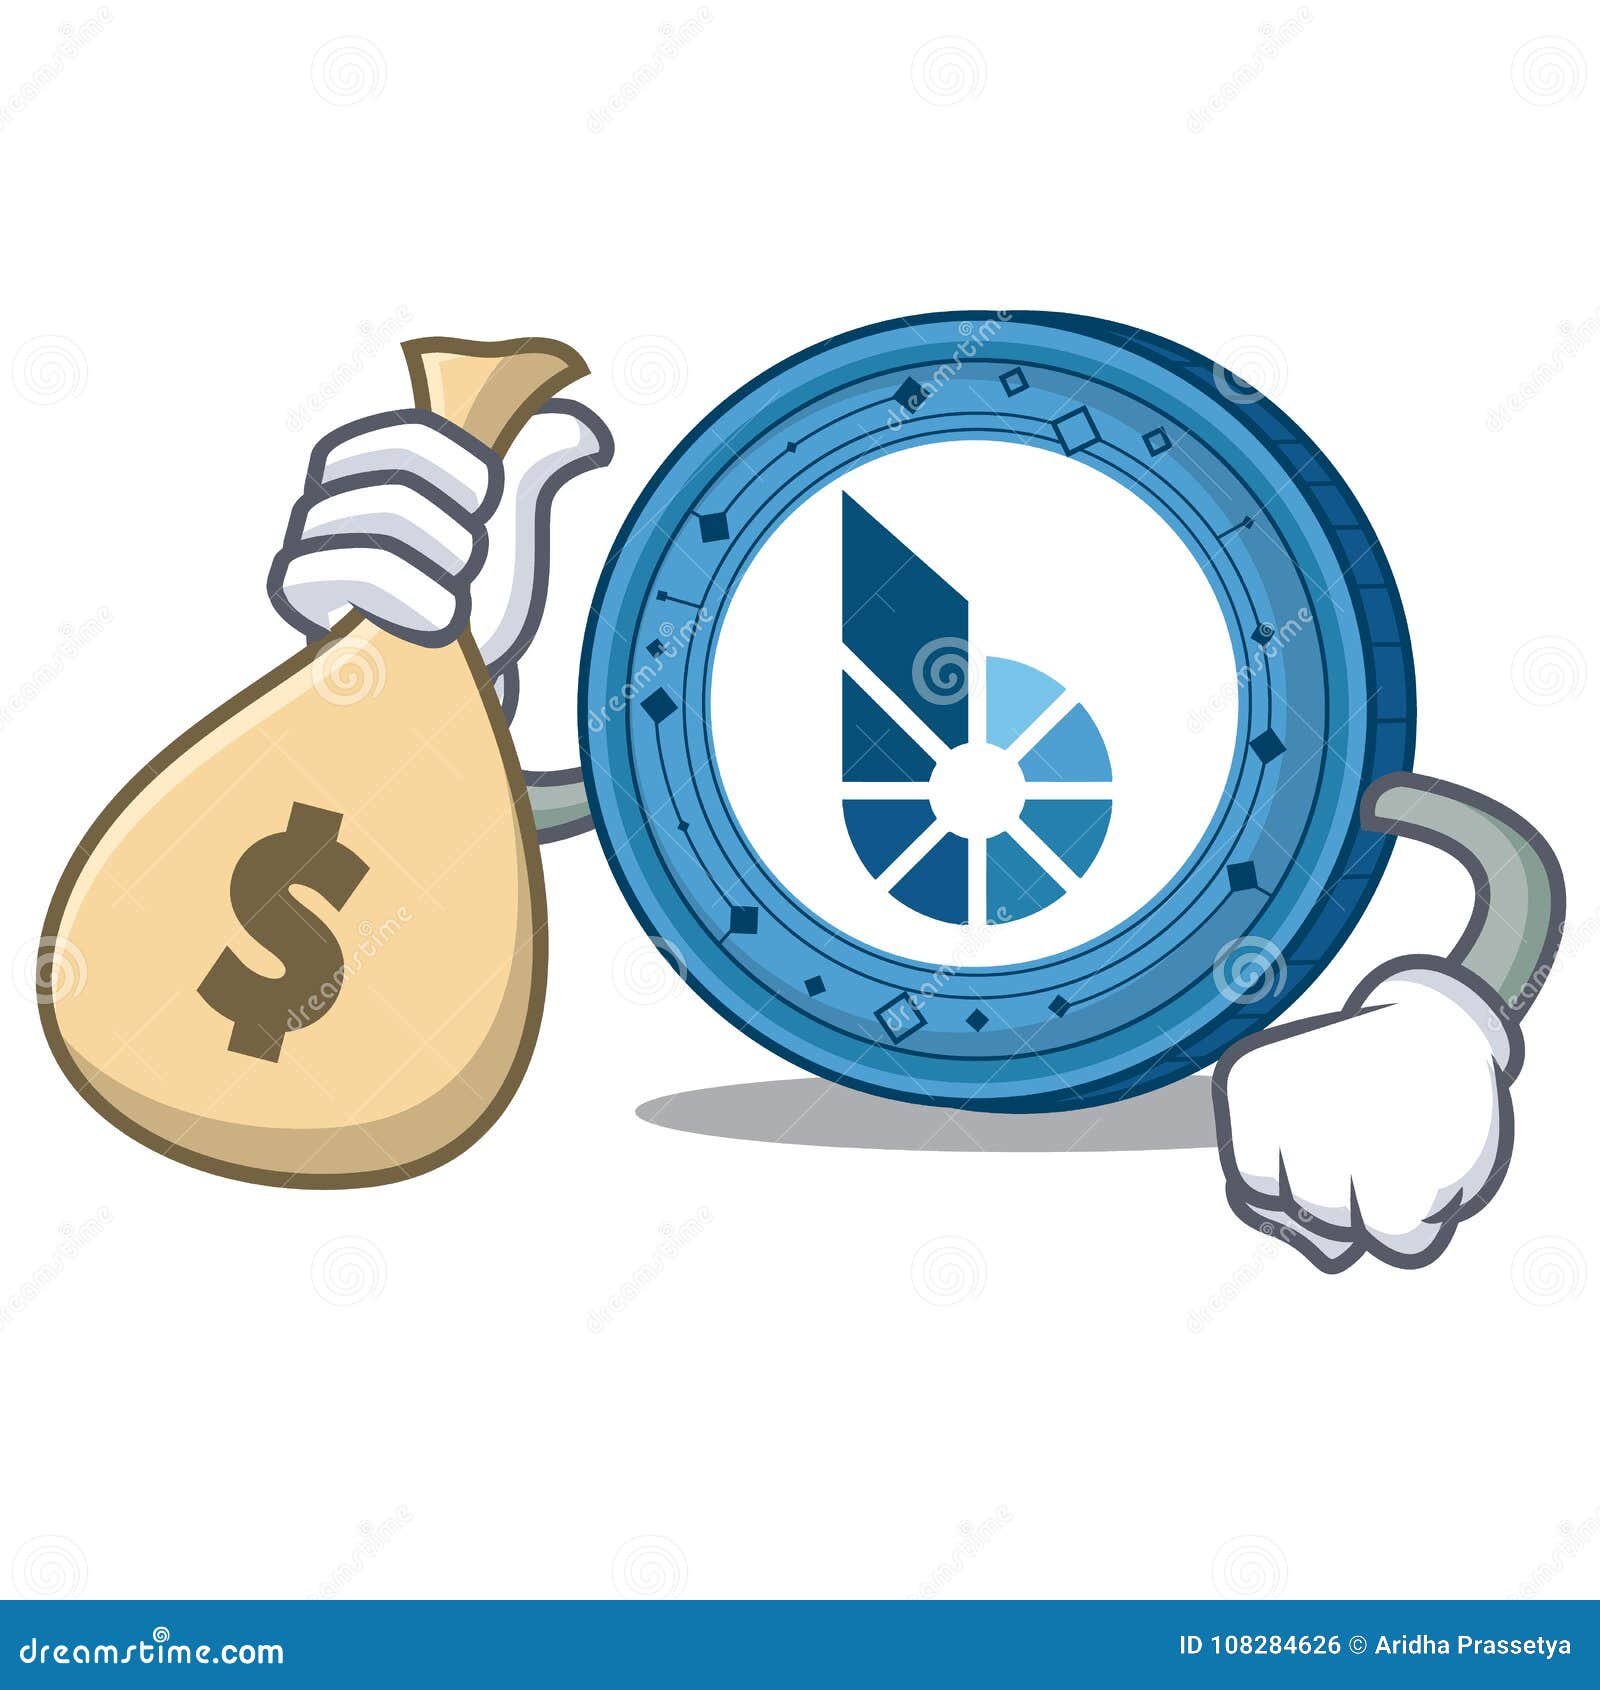 With Money Bag BitShares Coin Character Cartoon Stock ...